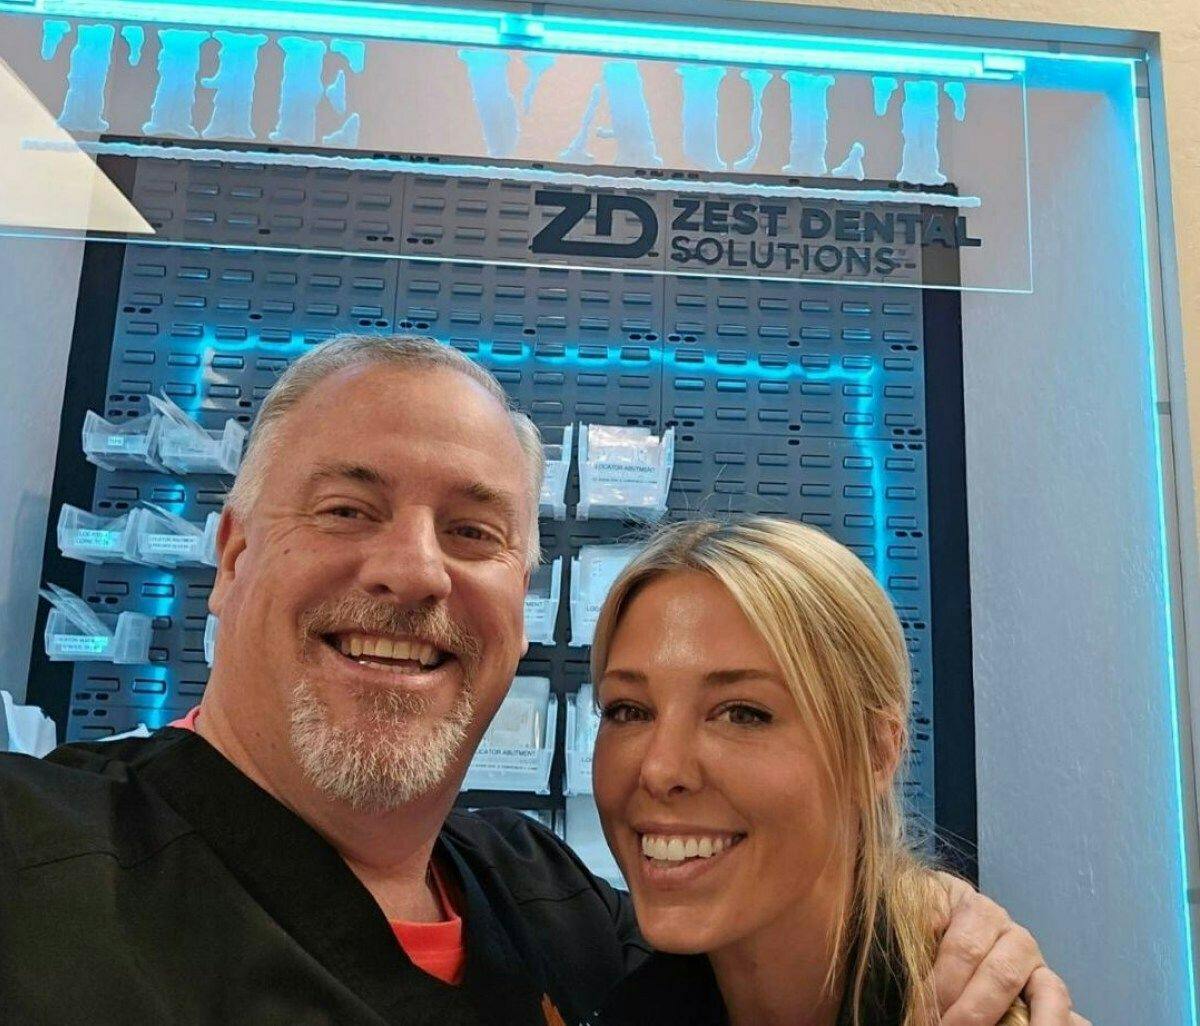 The Pathways' Justin Moody, DDS, with Zest Clinical Success Manager Jessica Shivers, RDH. | Image Credit: © Zest Dental Solutions